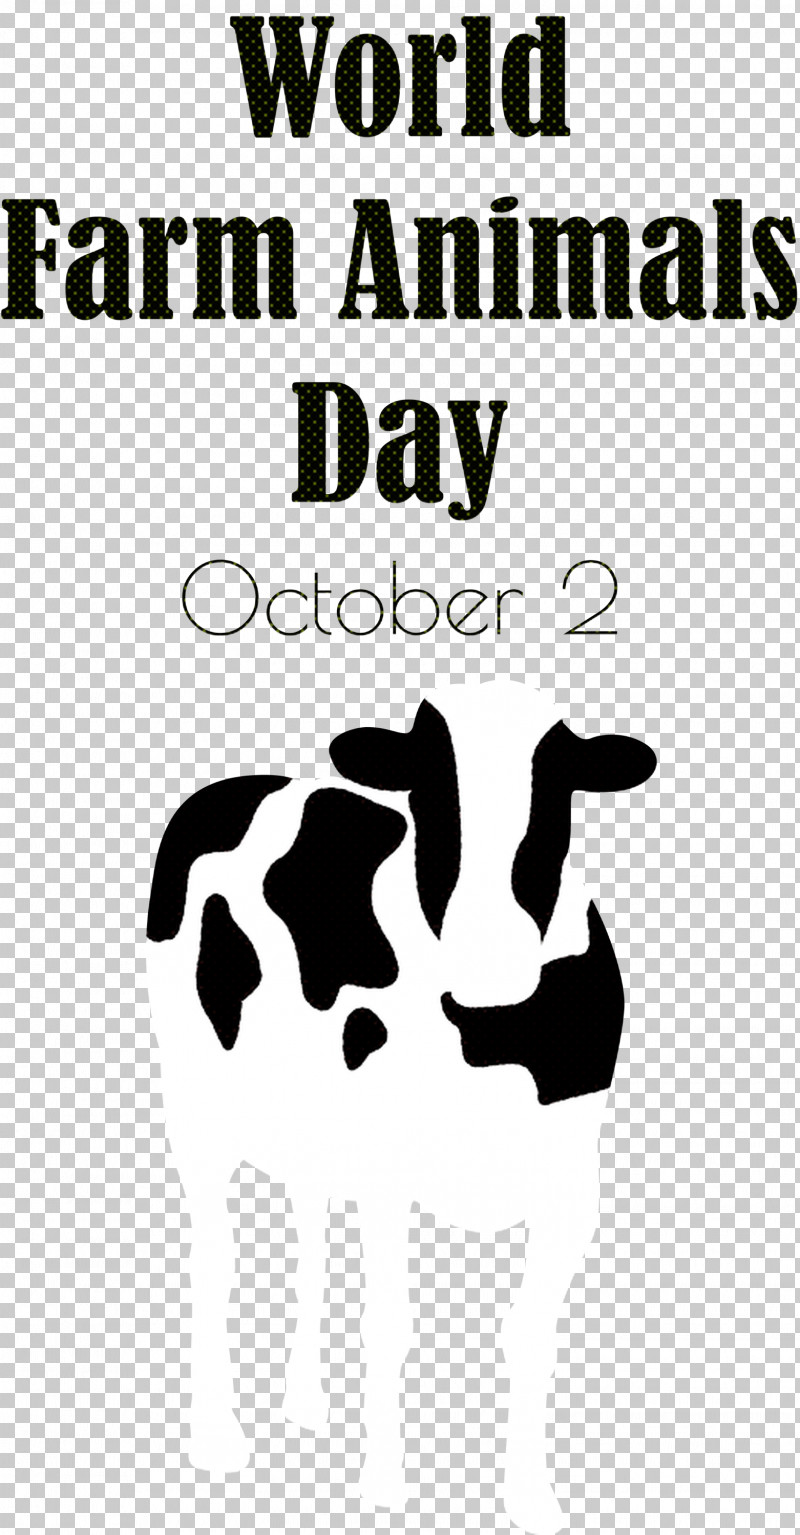 World Farm Animals Day PNG, Clipart, Black And White, Cartoon, Dog, Dr Seuss, Human Free PNG Download